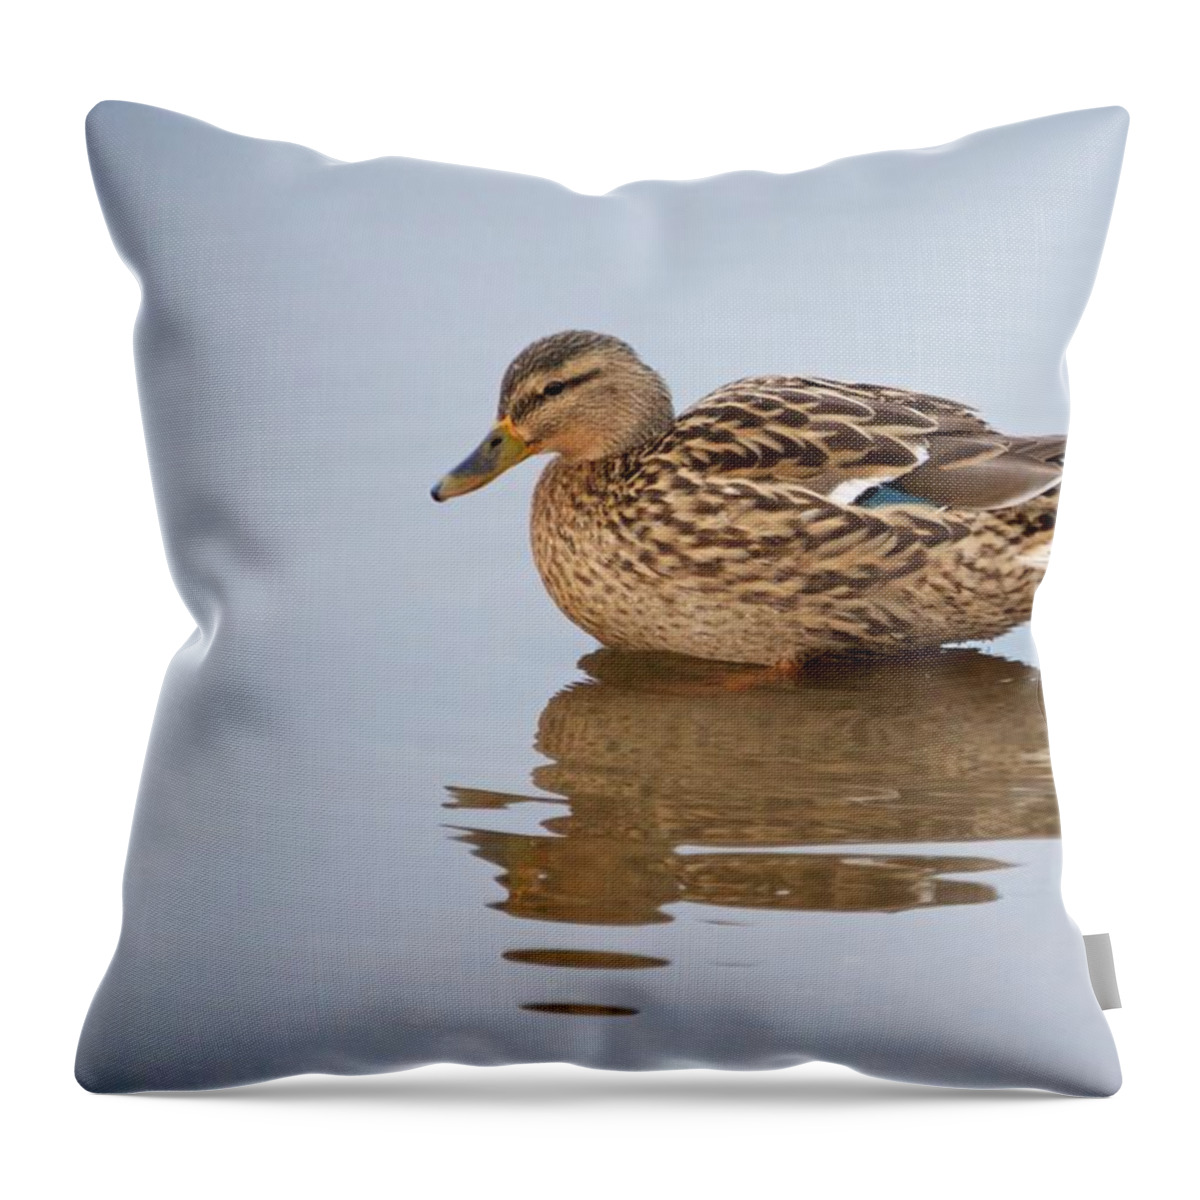 Duck Animal Puddle Lonely Lonliness Sad Thinking Contemplation Reflection Muddy Water Brown Female Bird Looking Throw Pillow featuring the photograph Lonely duck in a puddle by Sean Hannon